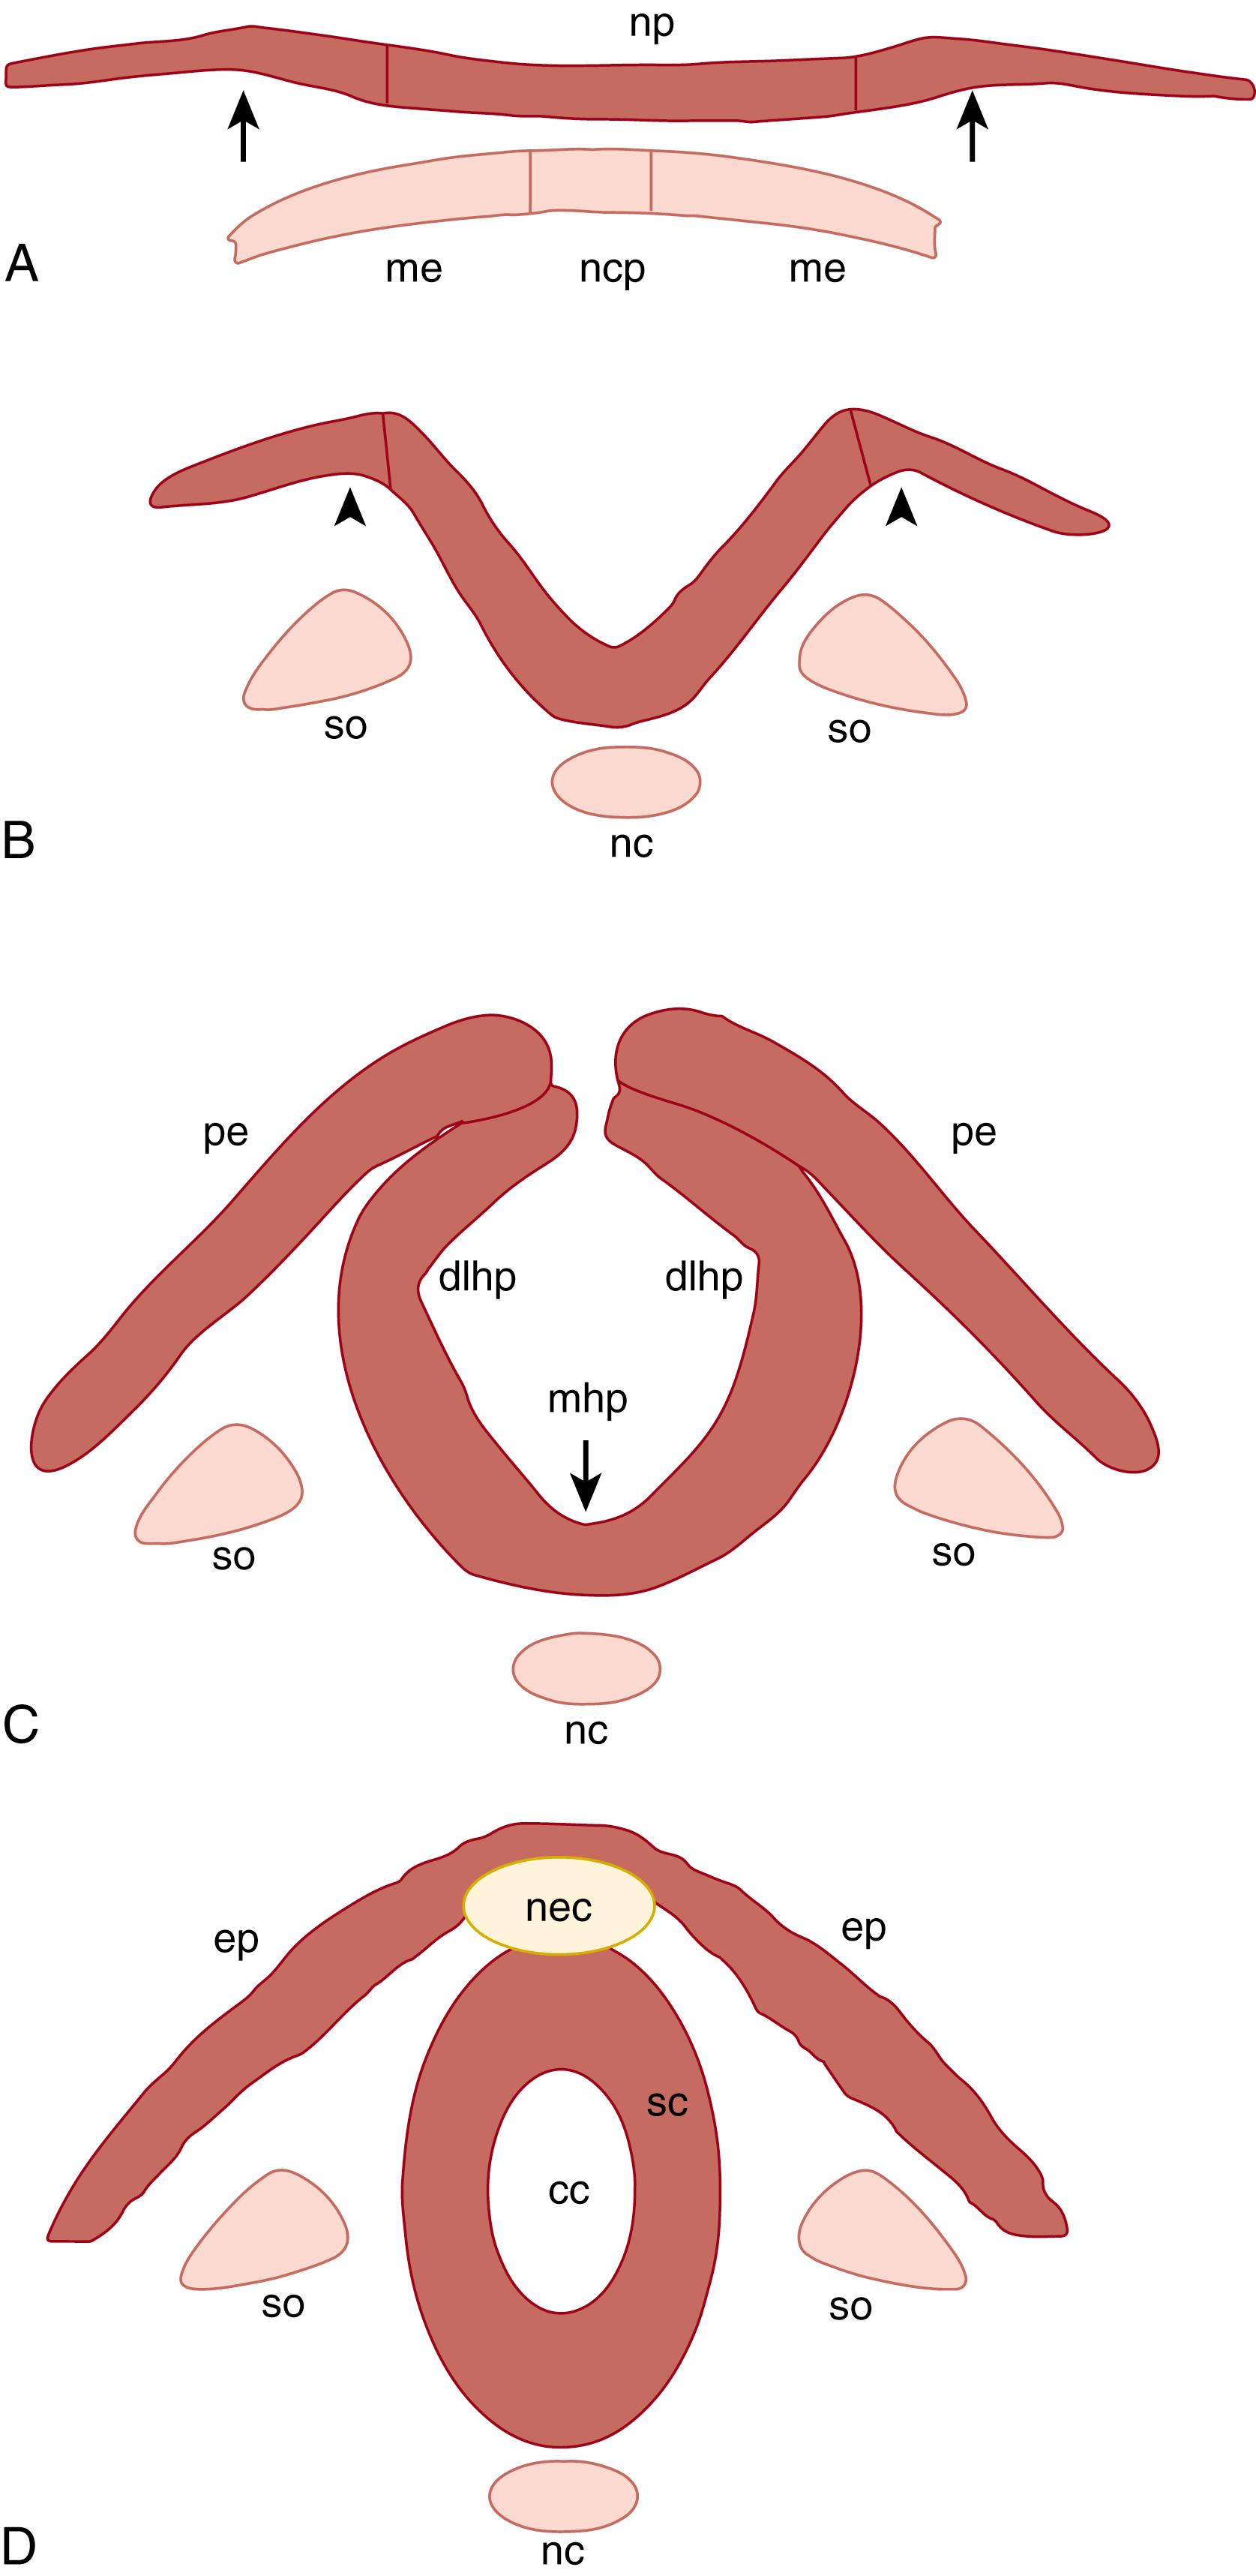 Fig. 124.2, A simplified diagram of neural tube closure. Neural folds form at the lateral extremes of the neural plate (A, arrows ), elevate (B, arrows ) and converge toward the dorsal midline (C), and fuse at their dorsal tips to form the closed neural tube (D). Bending or hinge points form at two sites: the median hinge point (mhp) overlying the notochord and the paired dorsolateral hinge points (dlhp) at the lateral sides of the folds. cc, Central canal; ep, epidermis; me, mesoderm; nc, notochord; ncp, notochordal plate; nec, neural crest; np, neural plate; pe, presumptive epidermis; sc, spinal cord; so, somites.